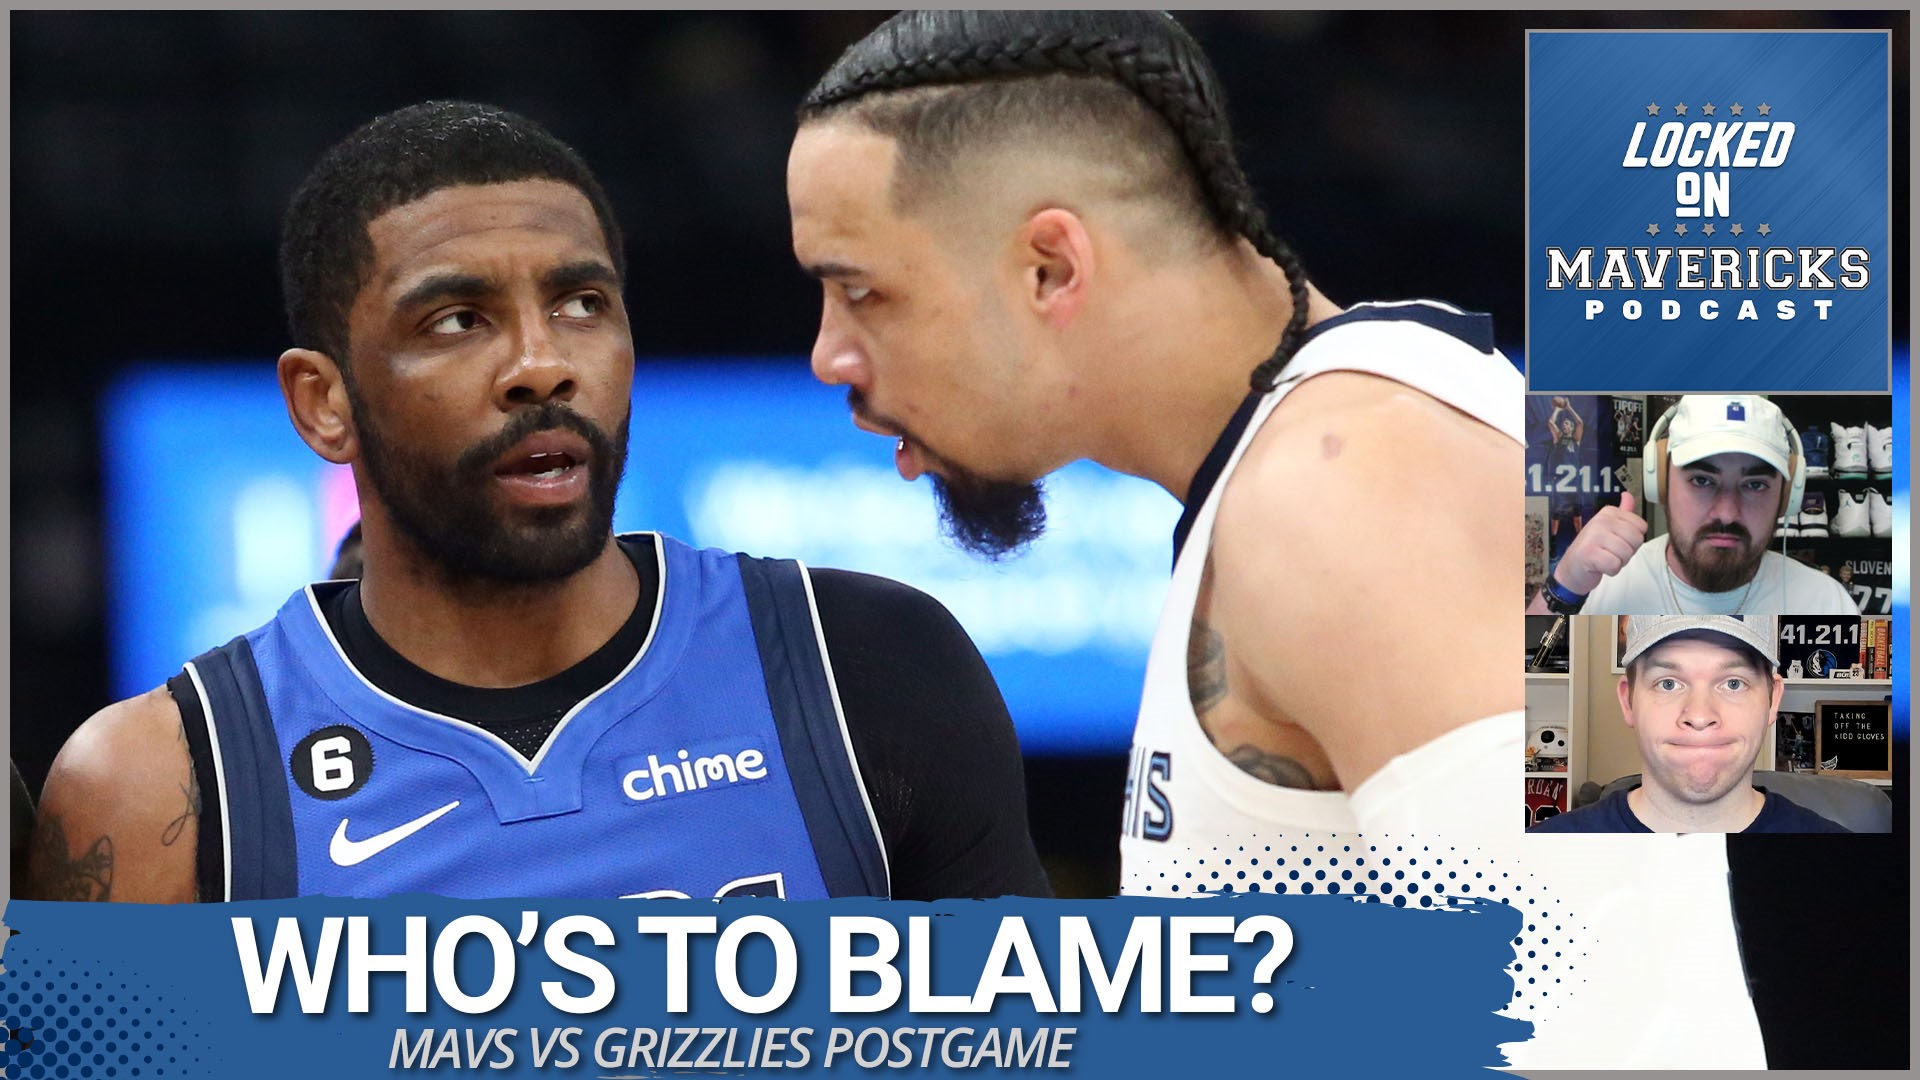 Nick Angstadt & Isaac Harris breakdown the Mavs loss to the Grizzlies and why their offense went so cold in the 4th Quarter. Who should get the most blame?